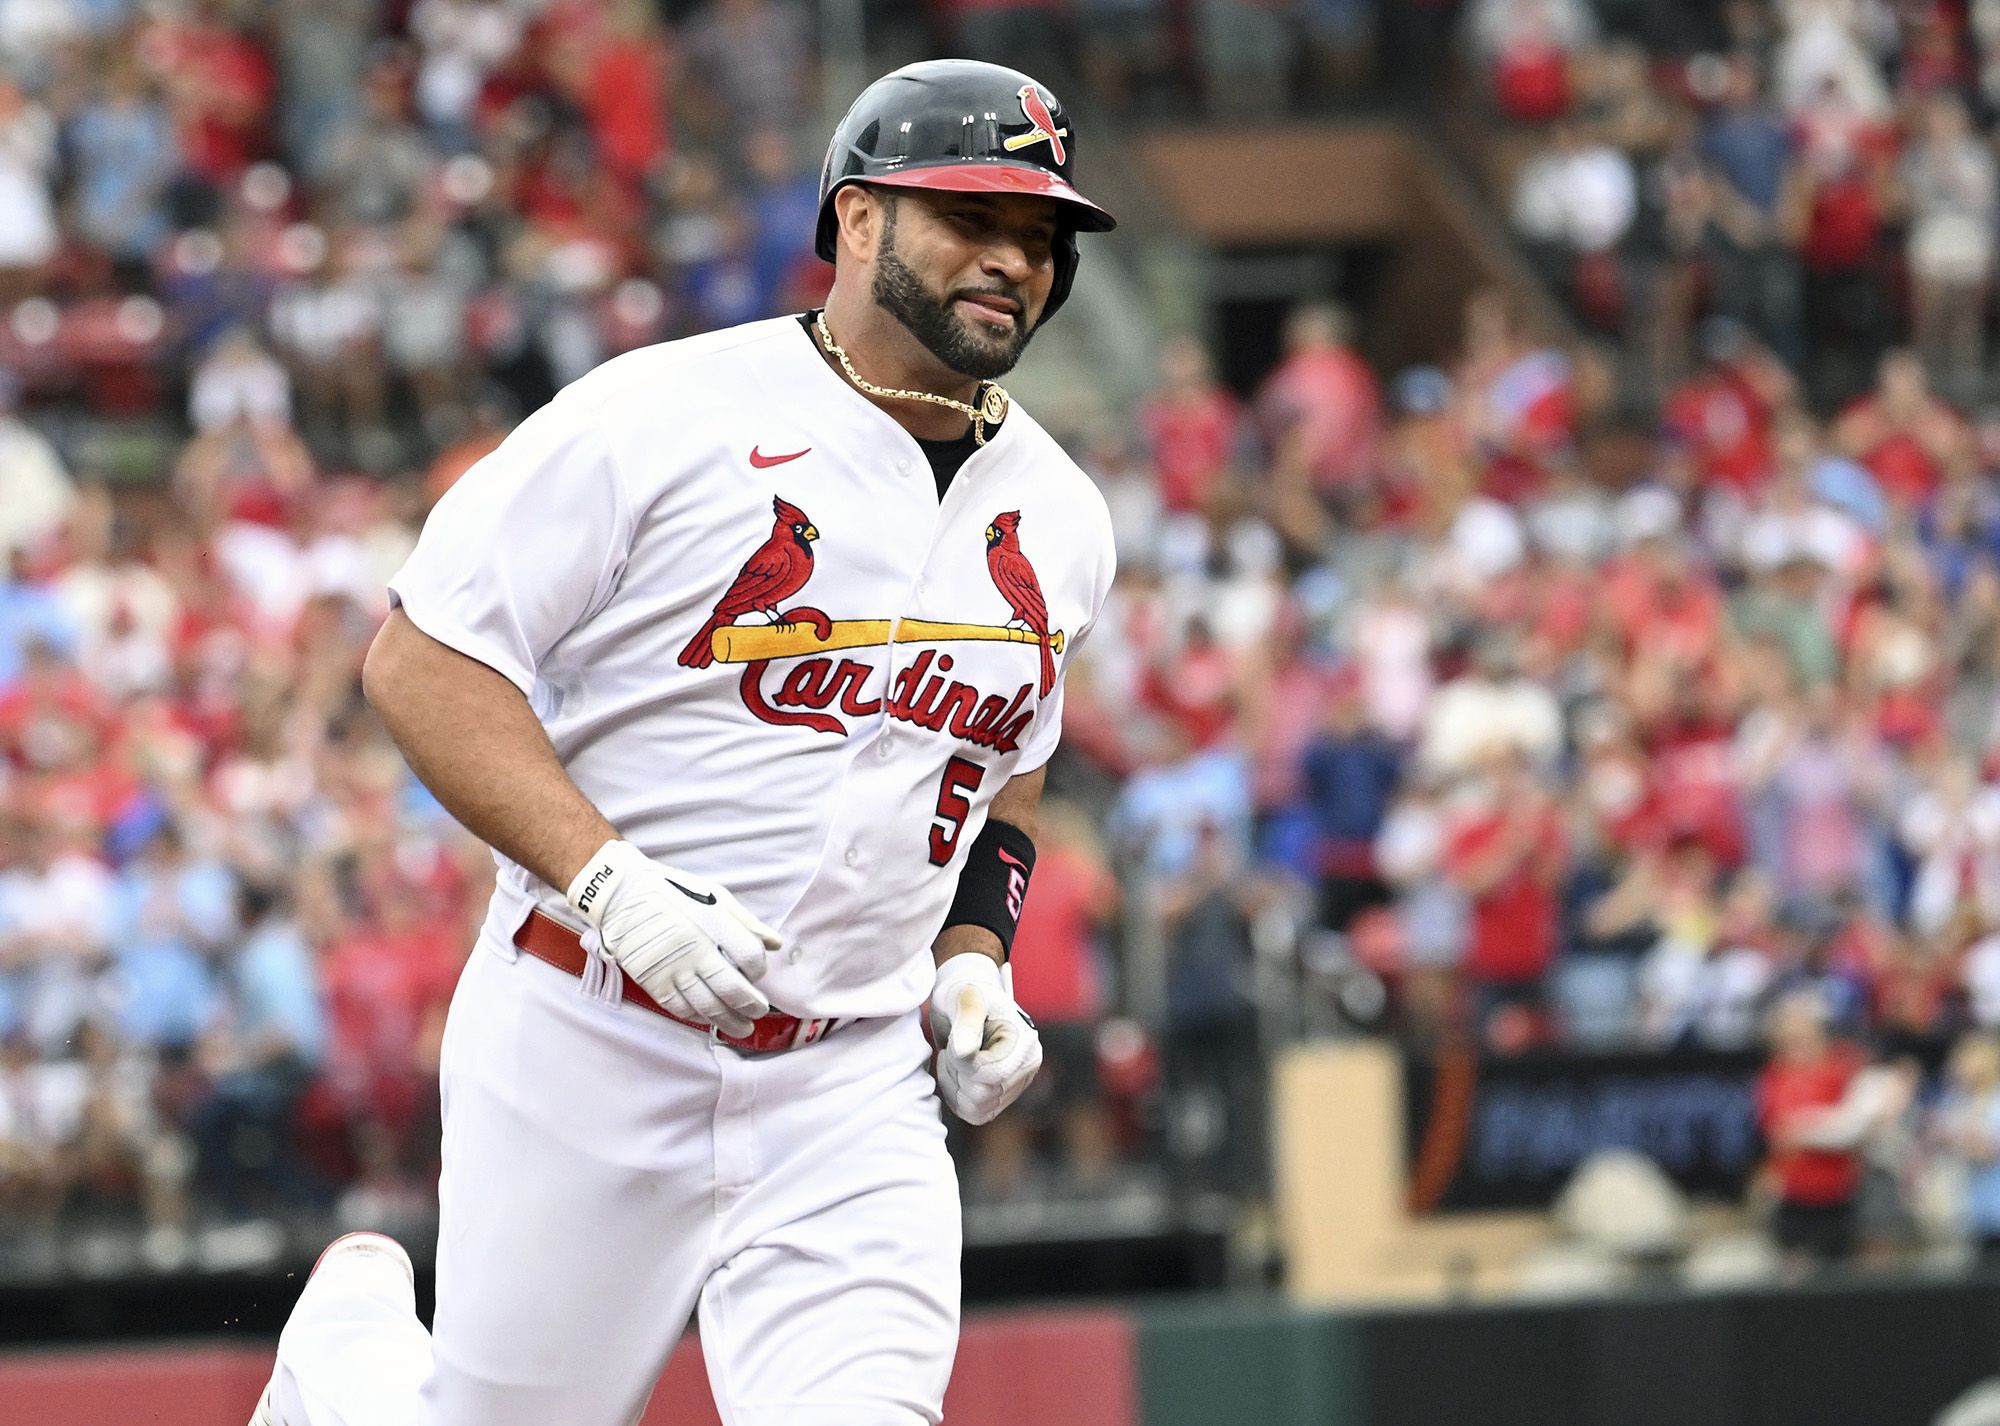 I decided to photoshop recently signed Albert Pujols in a Cardinals jersey.  Let me know what you think! : r/baseballcirclejerk